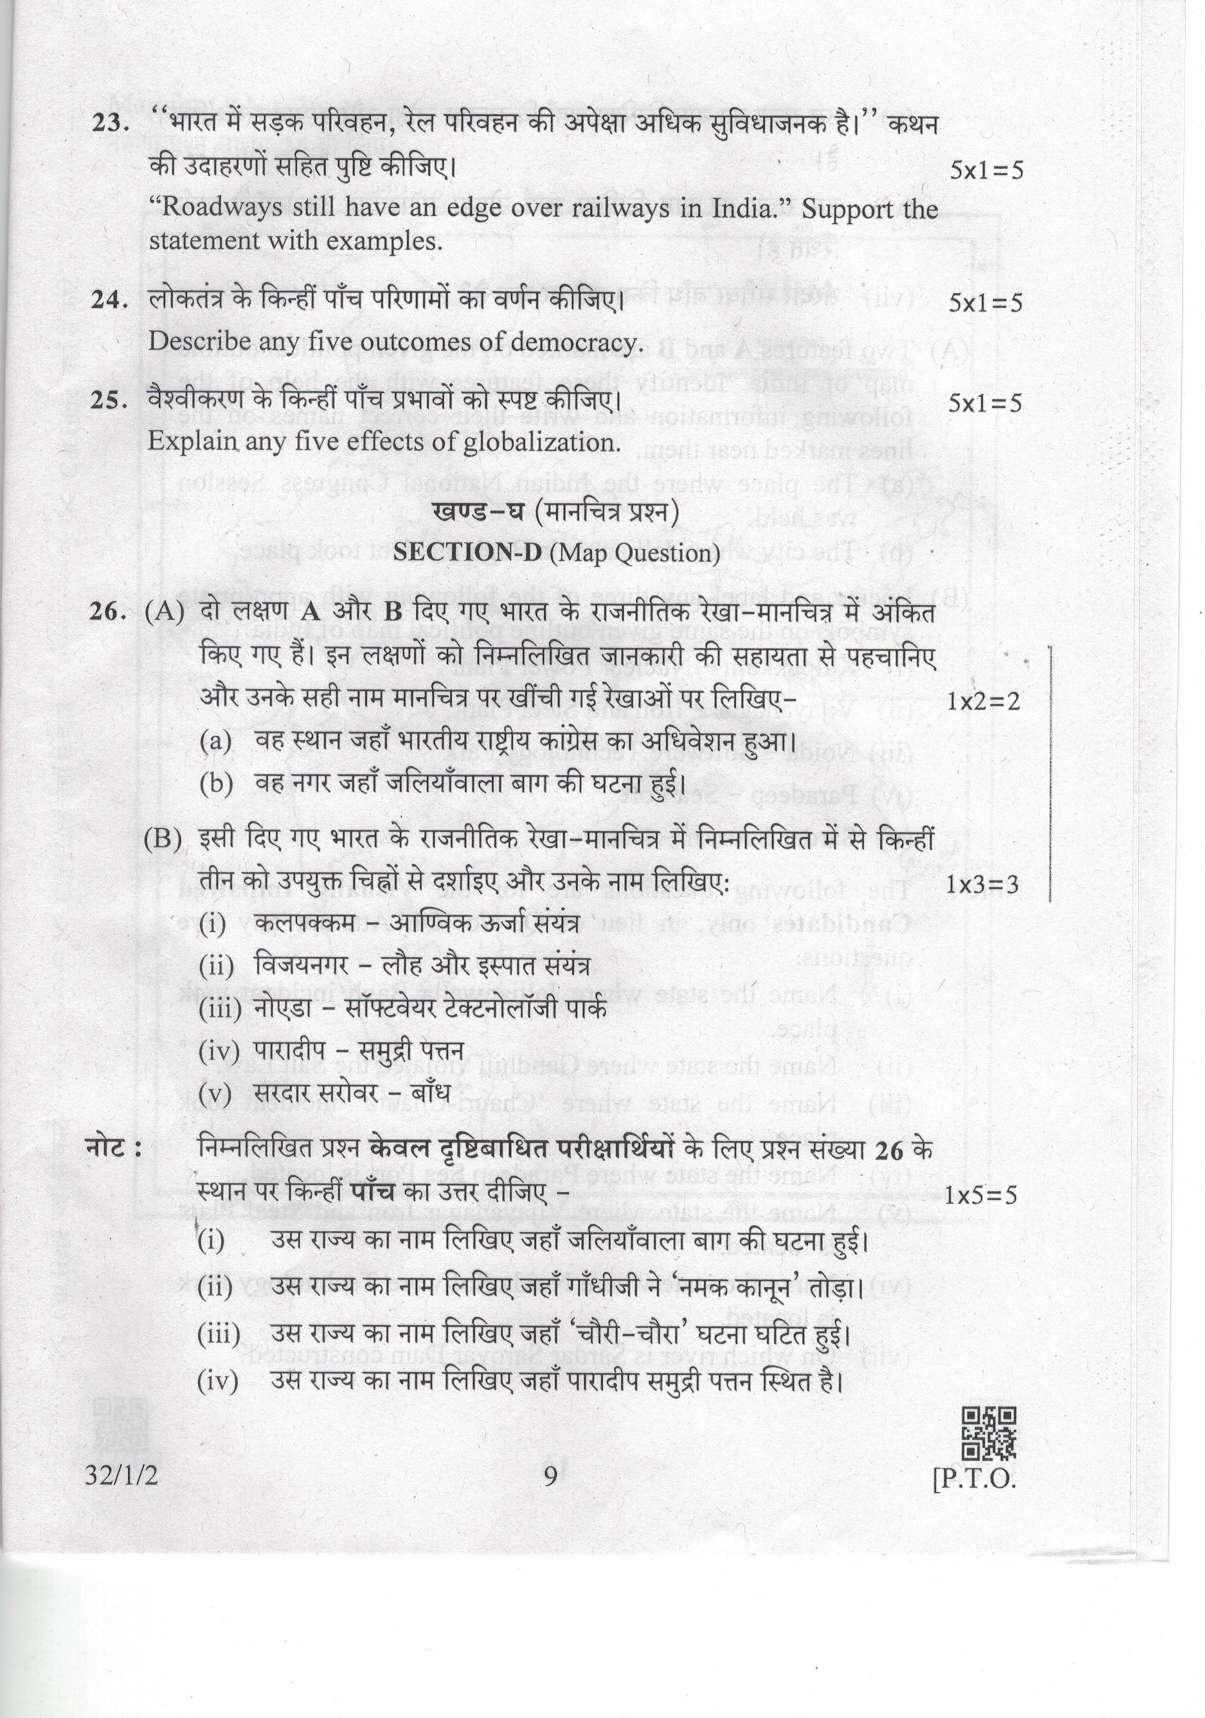 CBSE Class 10 32-1-2 Social Science 2019 Question Paper - Page 9